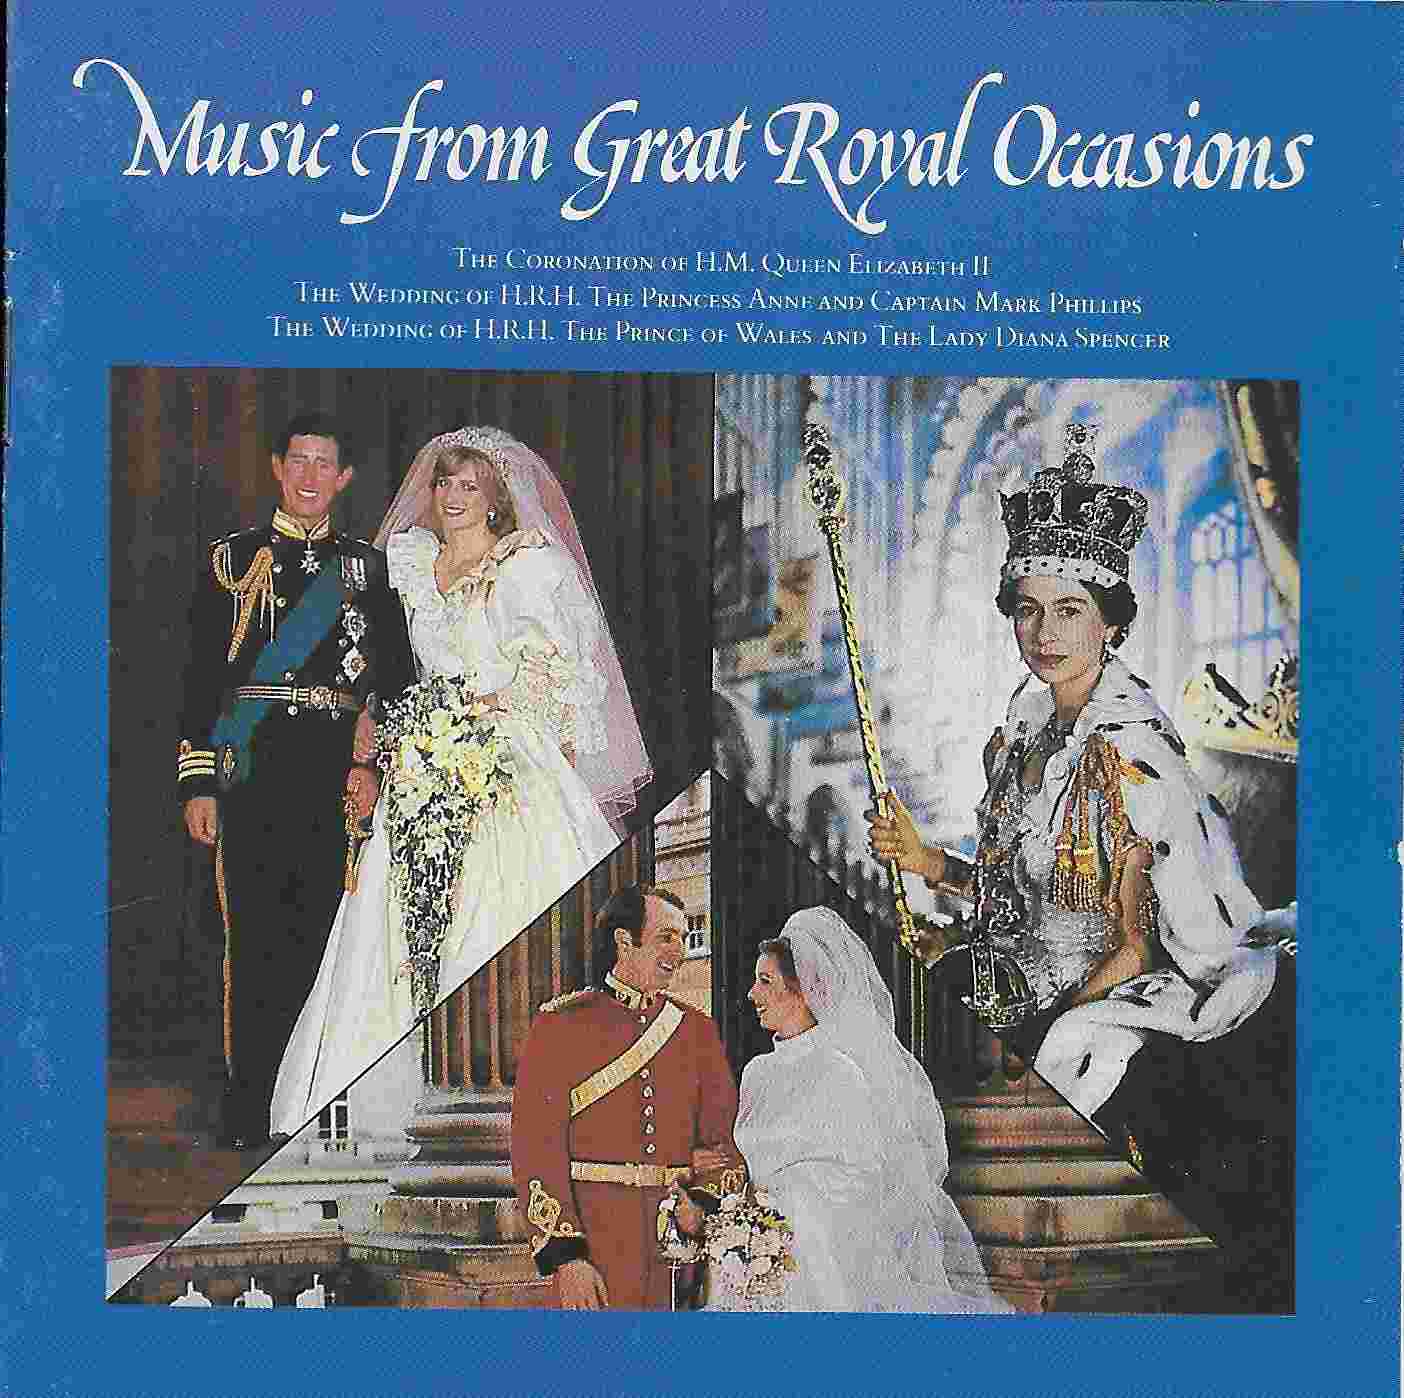 Picture of Music from great royal occasions by artist Various from the BBC cds - Records and Tapes library